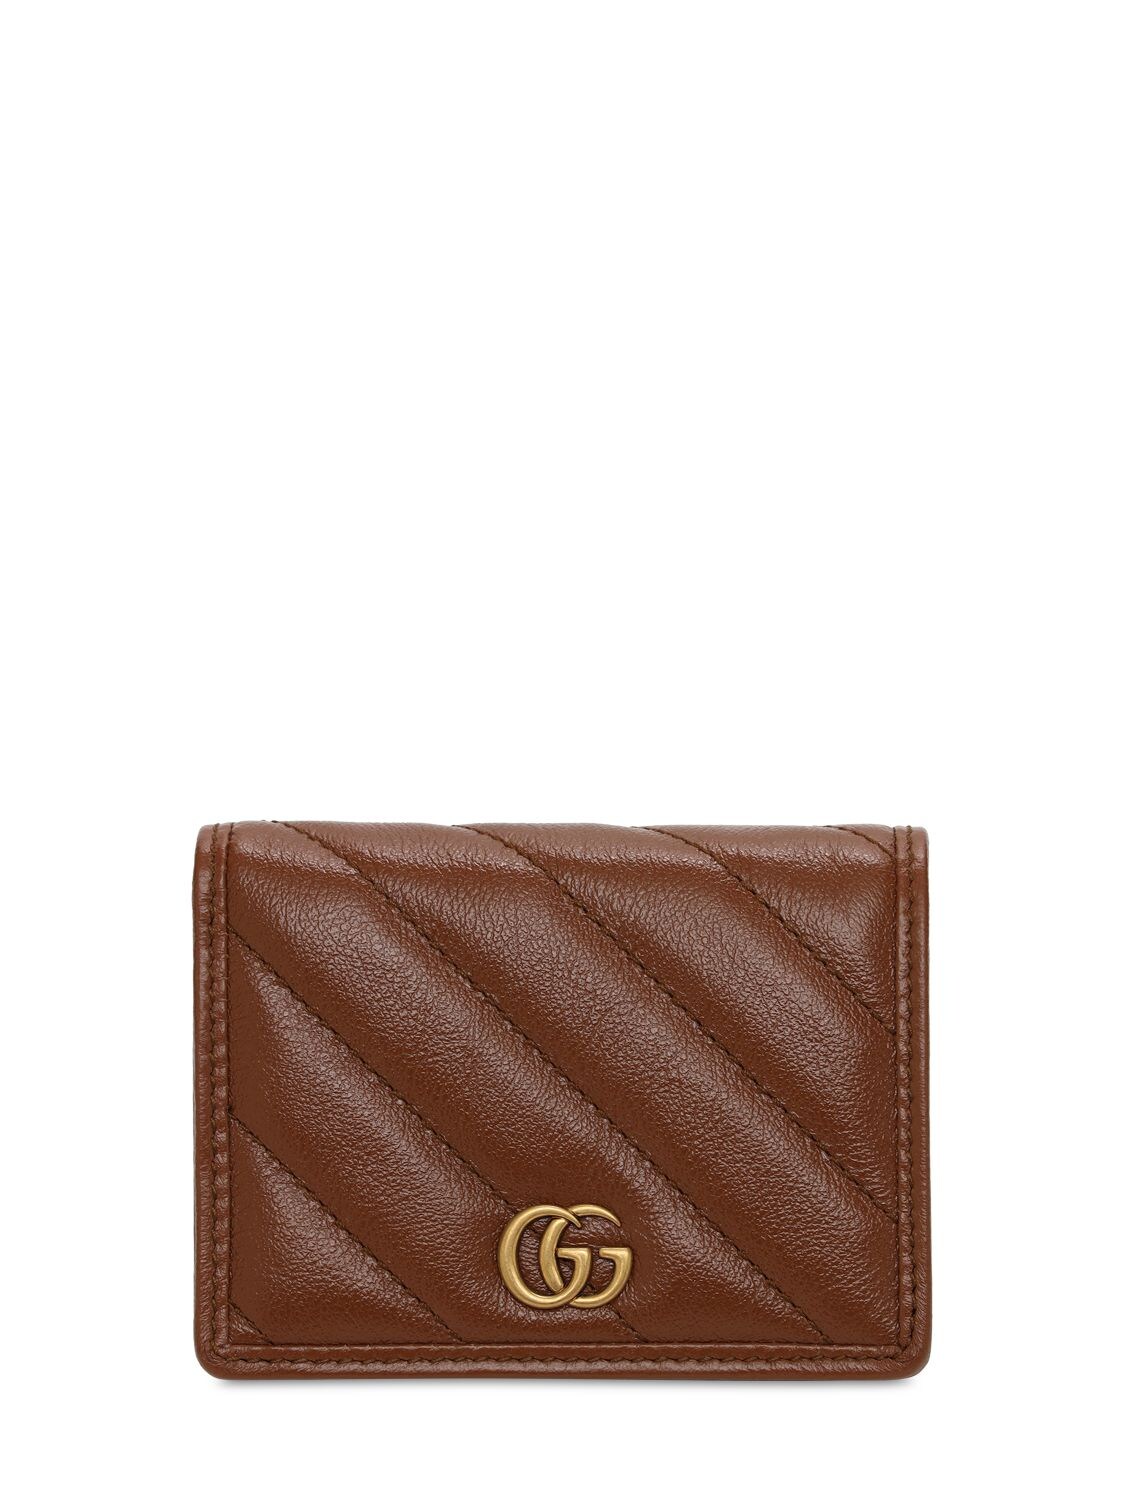 GUCCI GG MARMONT 2.0 LEATHER WALLET,73IIJS050-MJUZNQ2